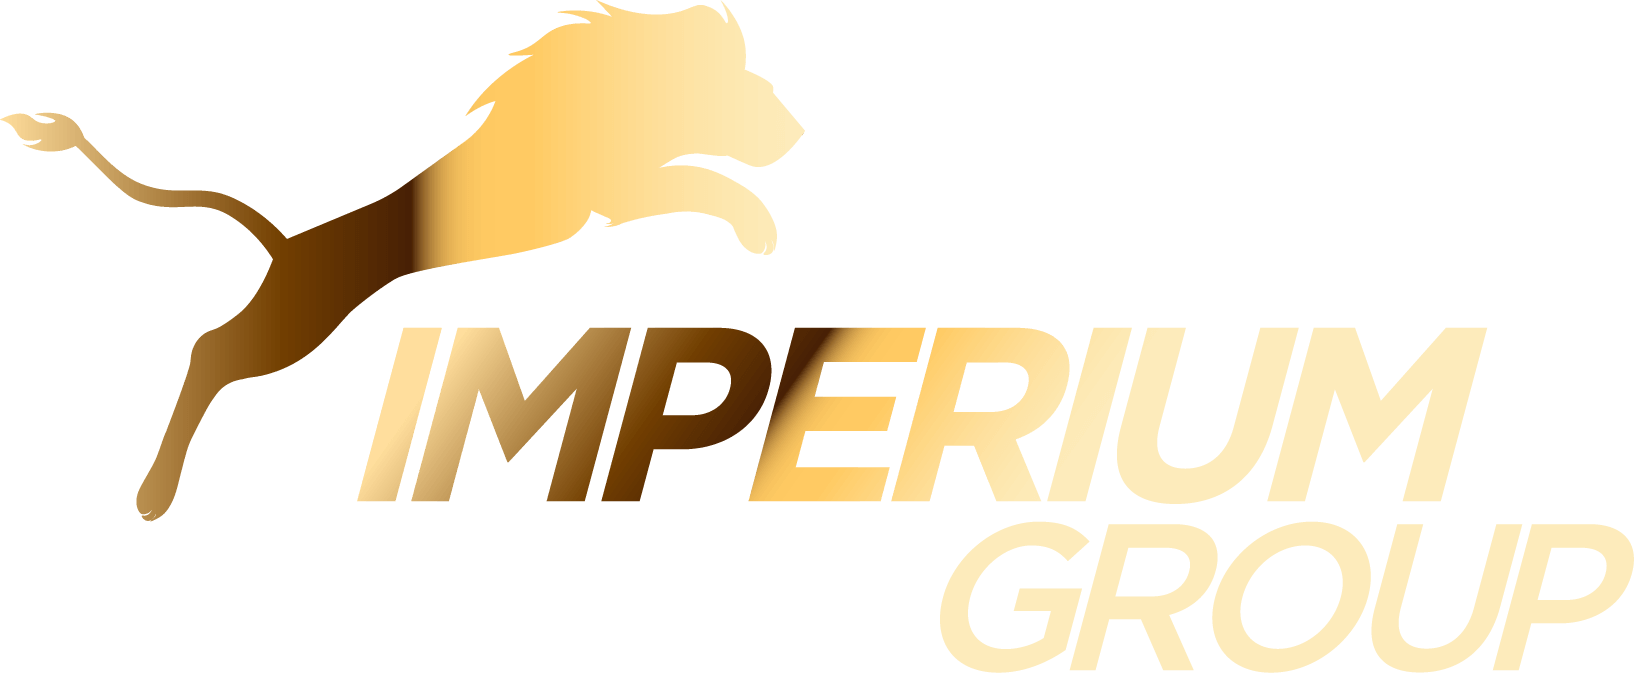 imperium-group.png